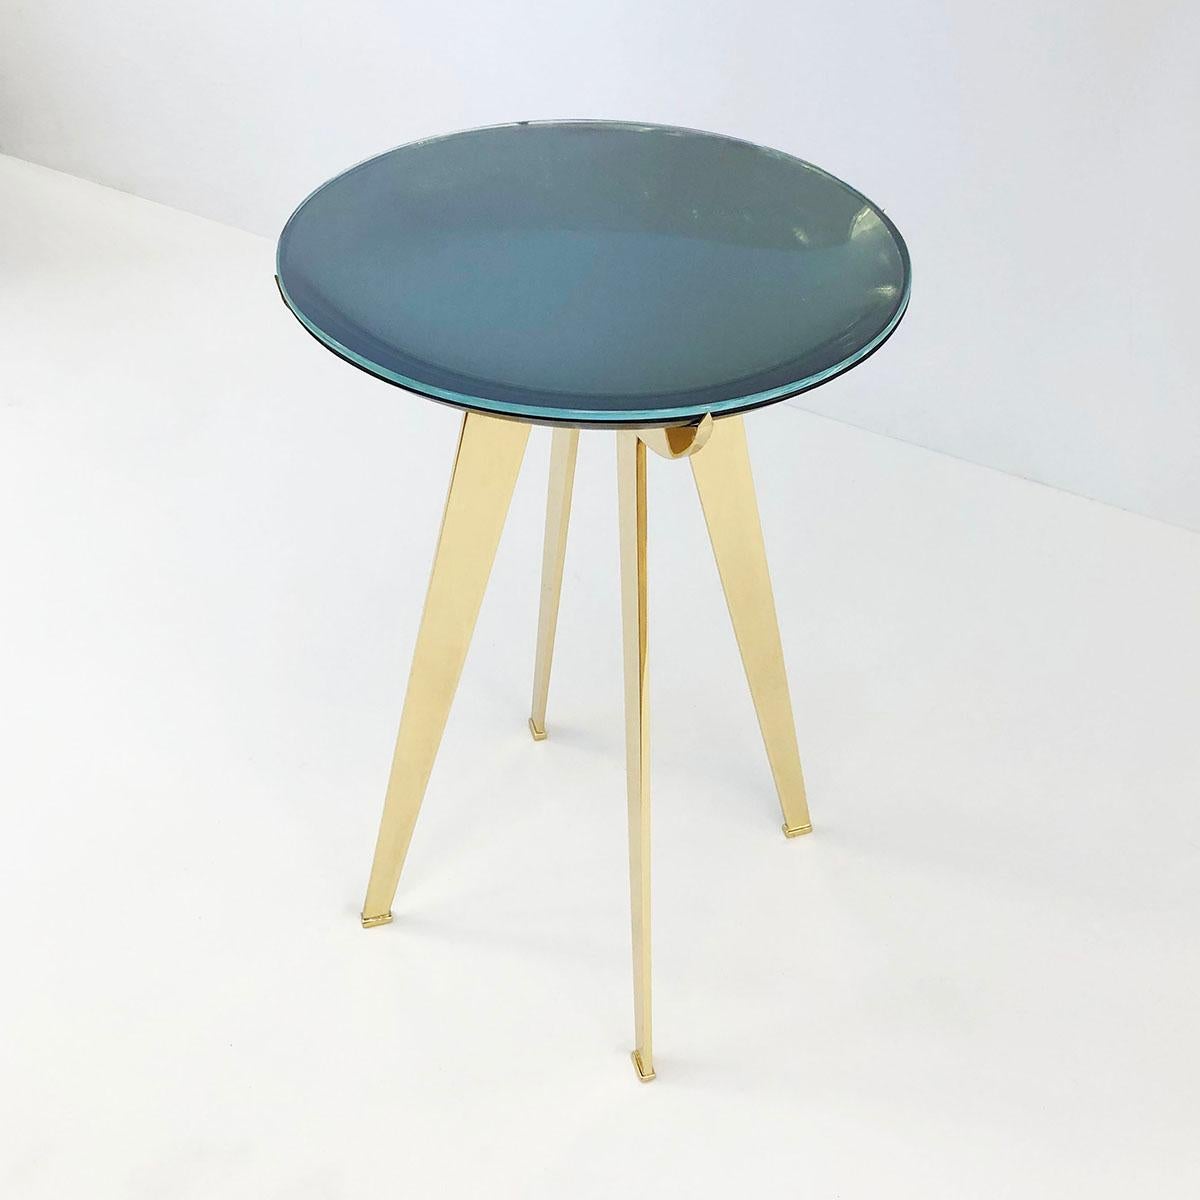 The Riflesso side table is designed around a tinted and mirrored double lens glass top which gives the piece a unique sense of depth. The brass frame with four tapered legs cradles the glass with crescent shaped supports.  Also available as a coffee